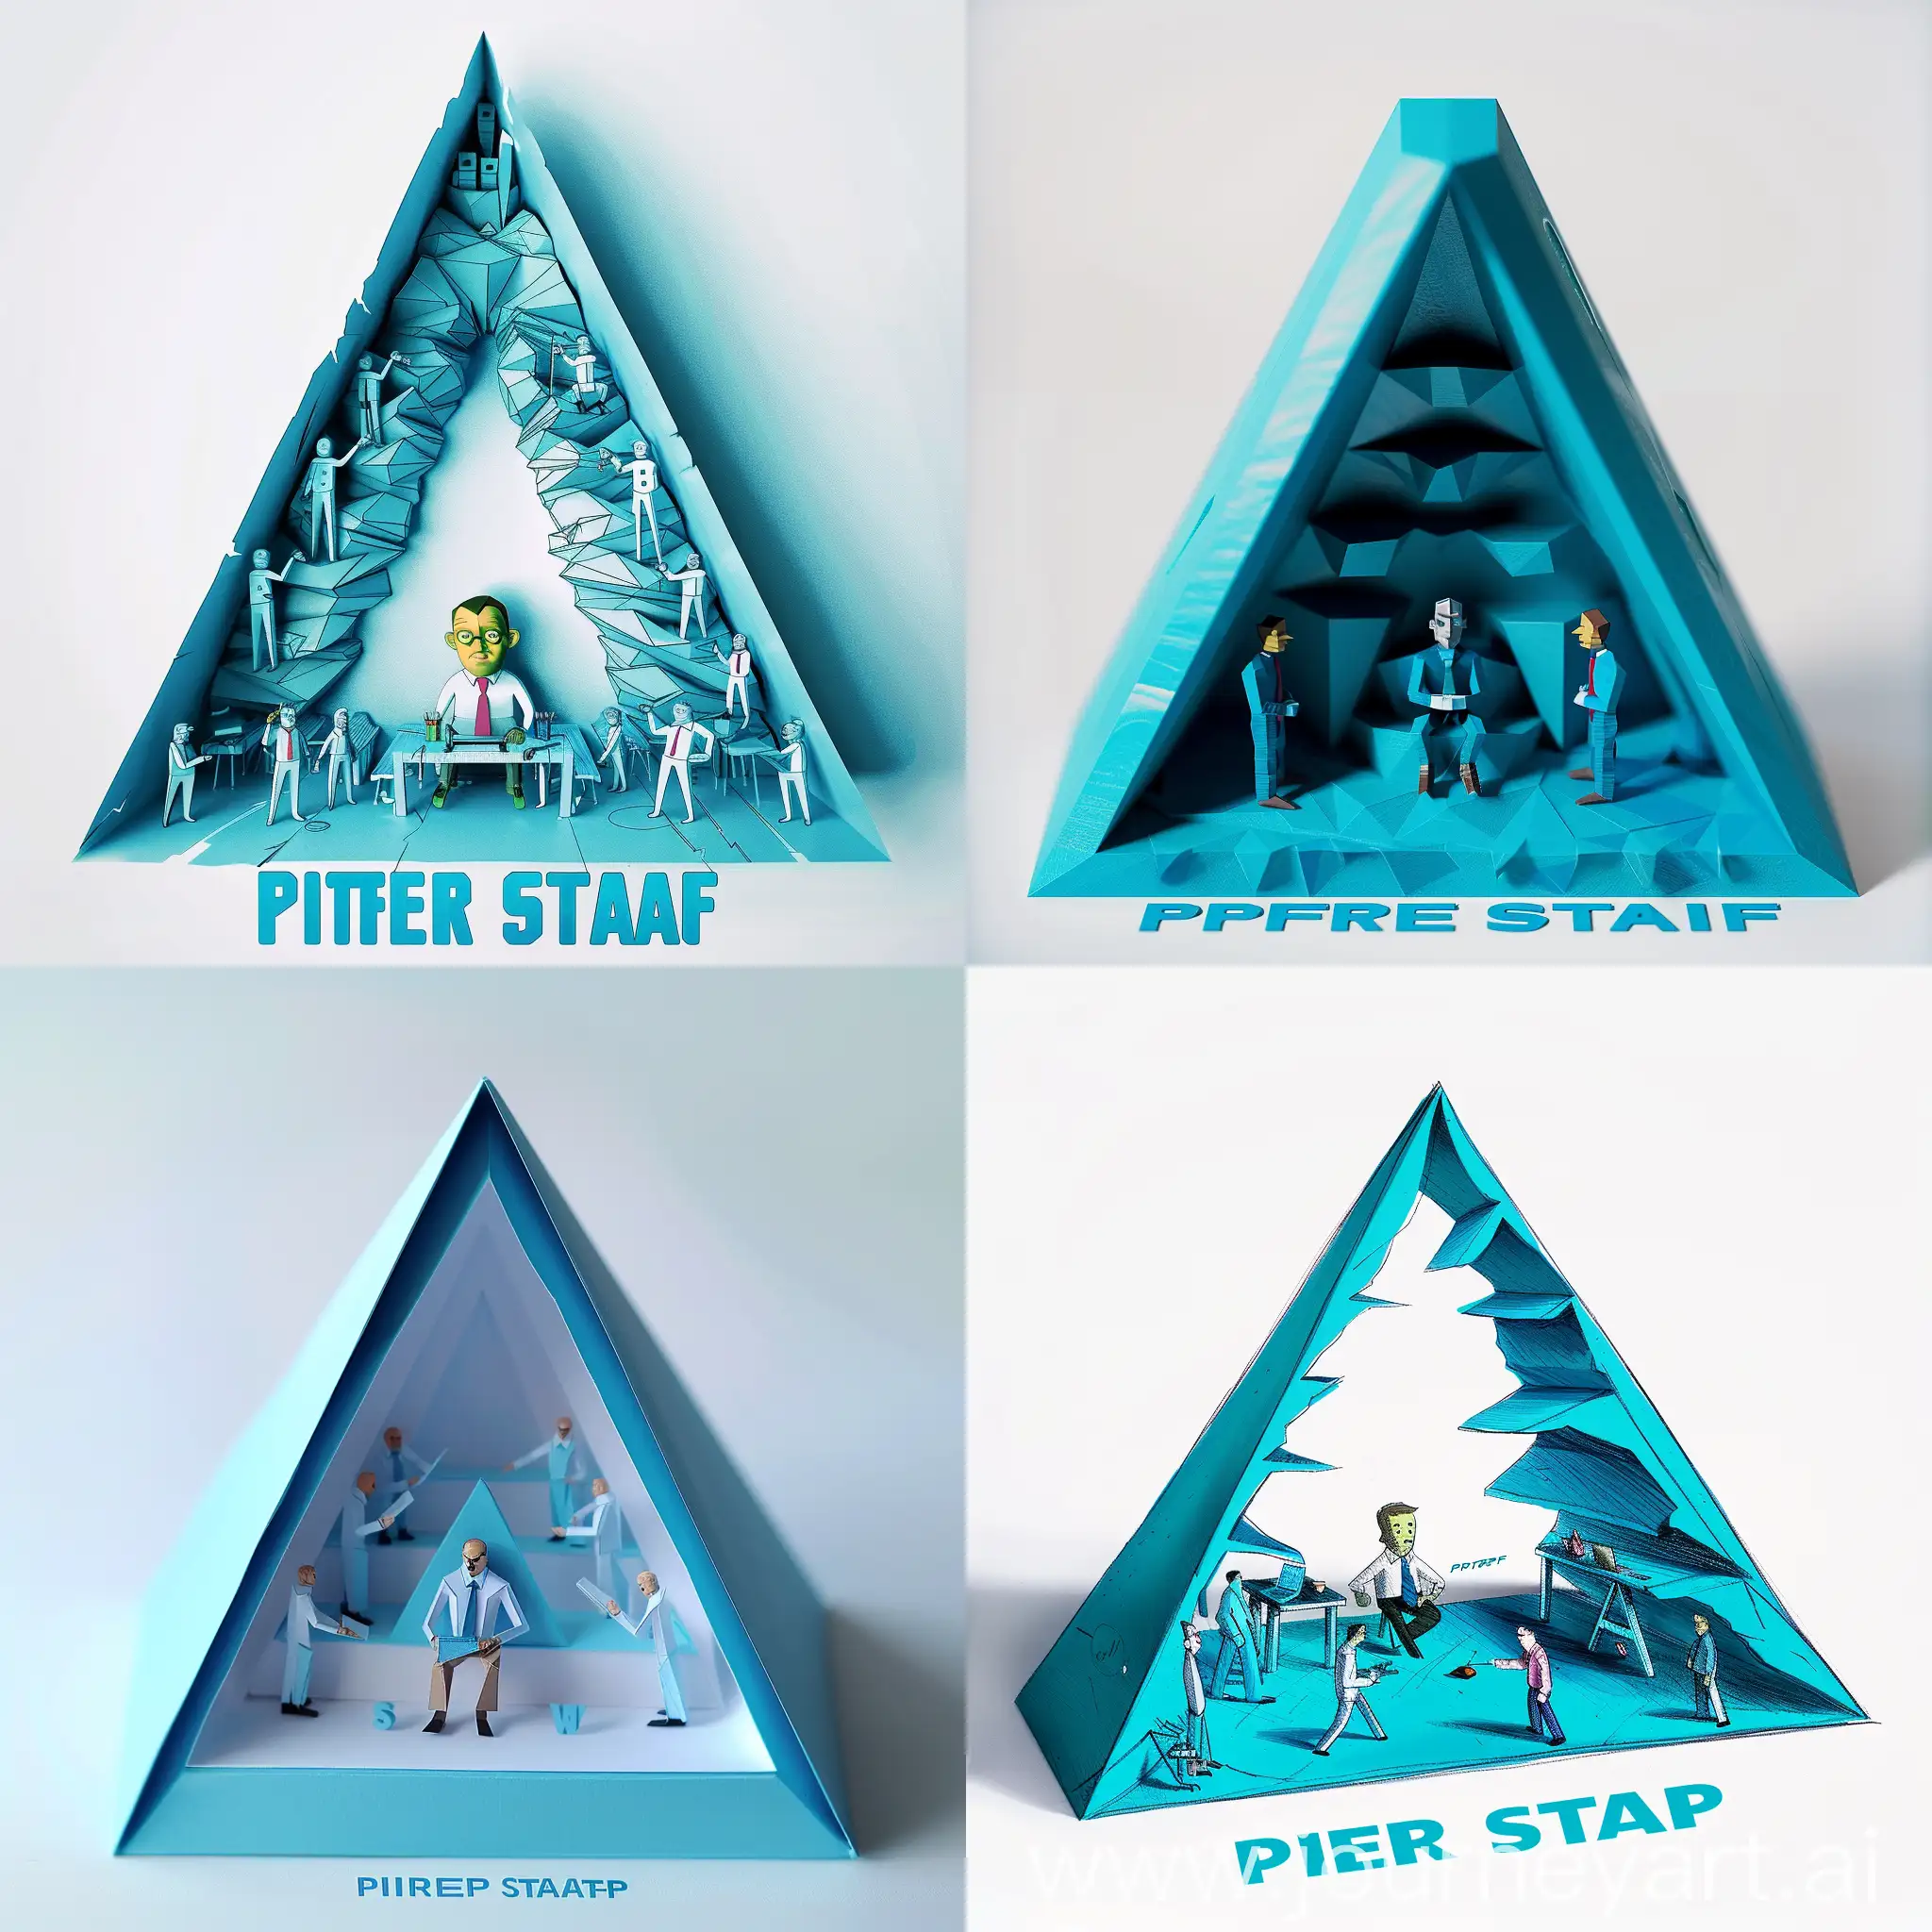 ThreeDimensional-Blue-Triangle-with-Working-Men-and-PITER-STAFF-Text